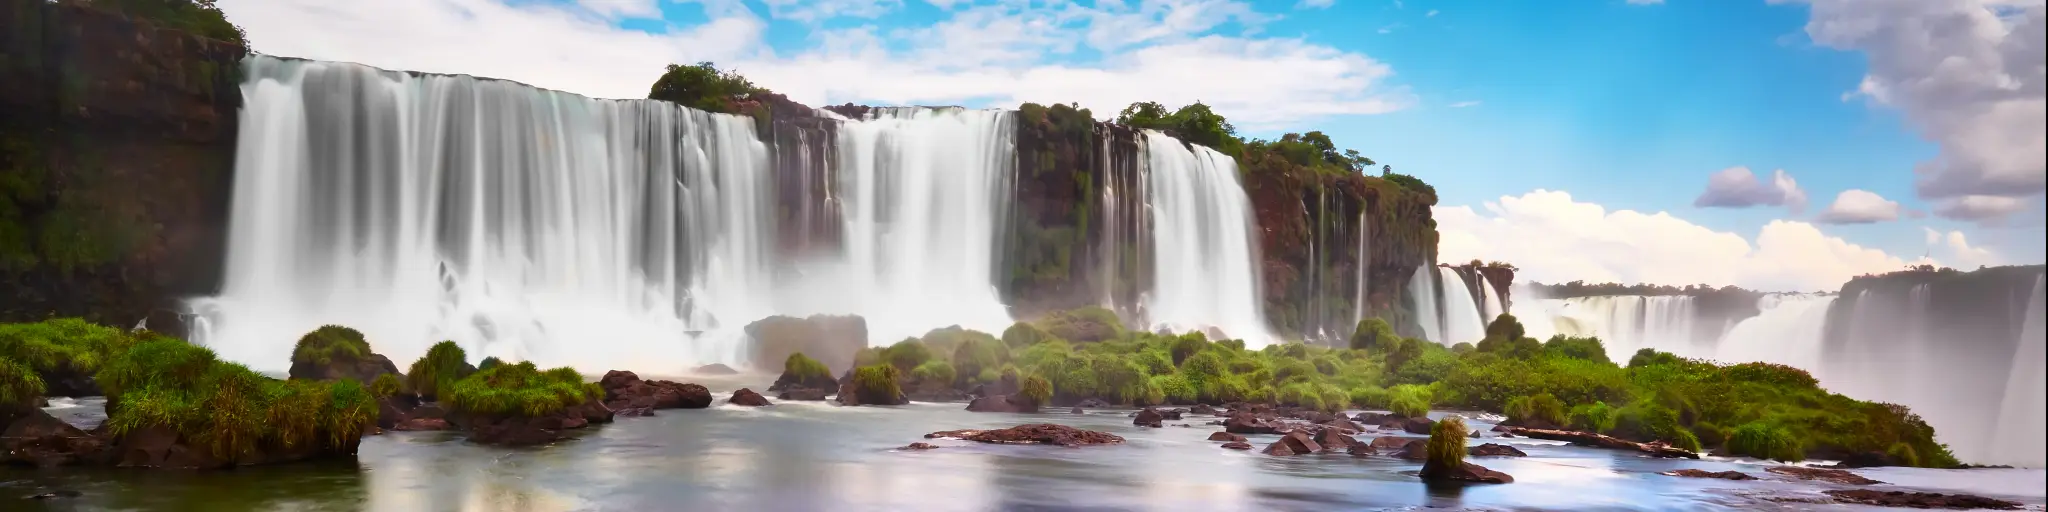 Iguazu Falls on the border between Argentina, Paraguay and Brazil are a natural phenomenon well worth the road trip from Buenos Aires.